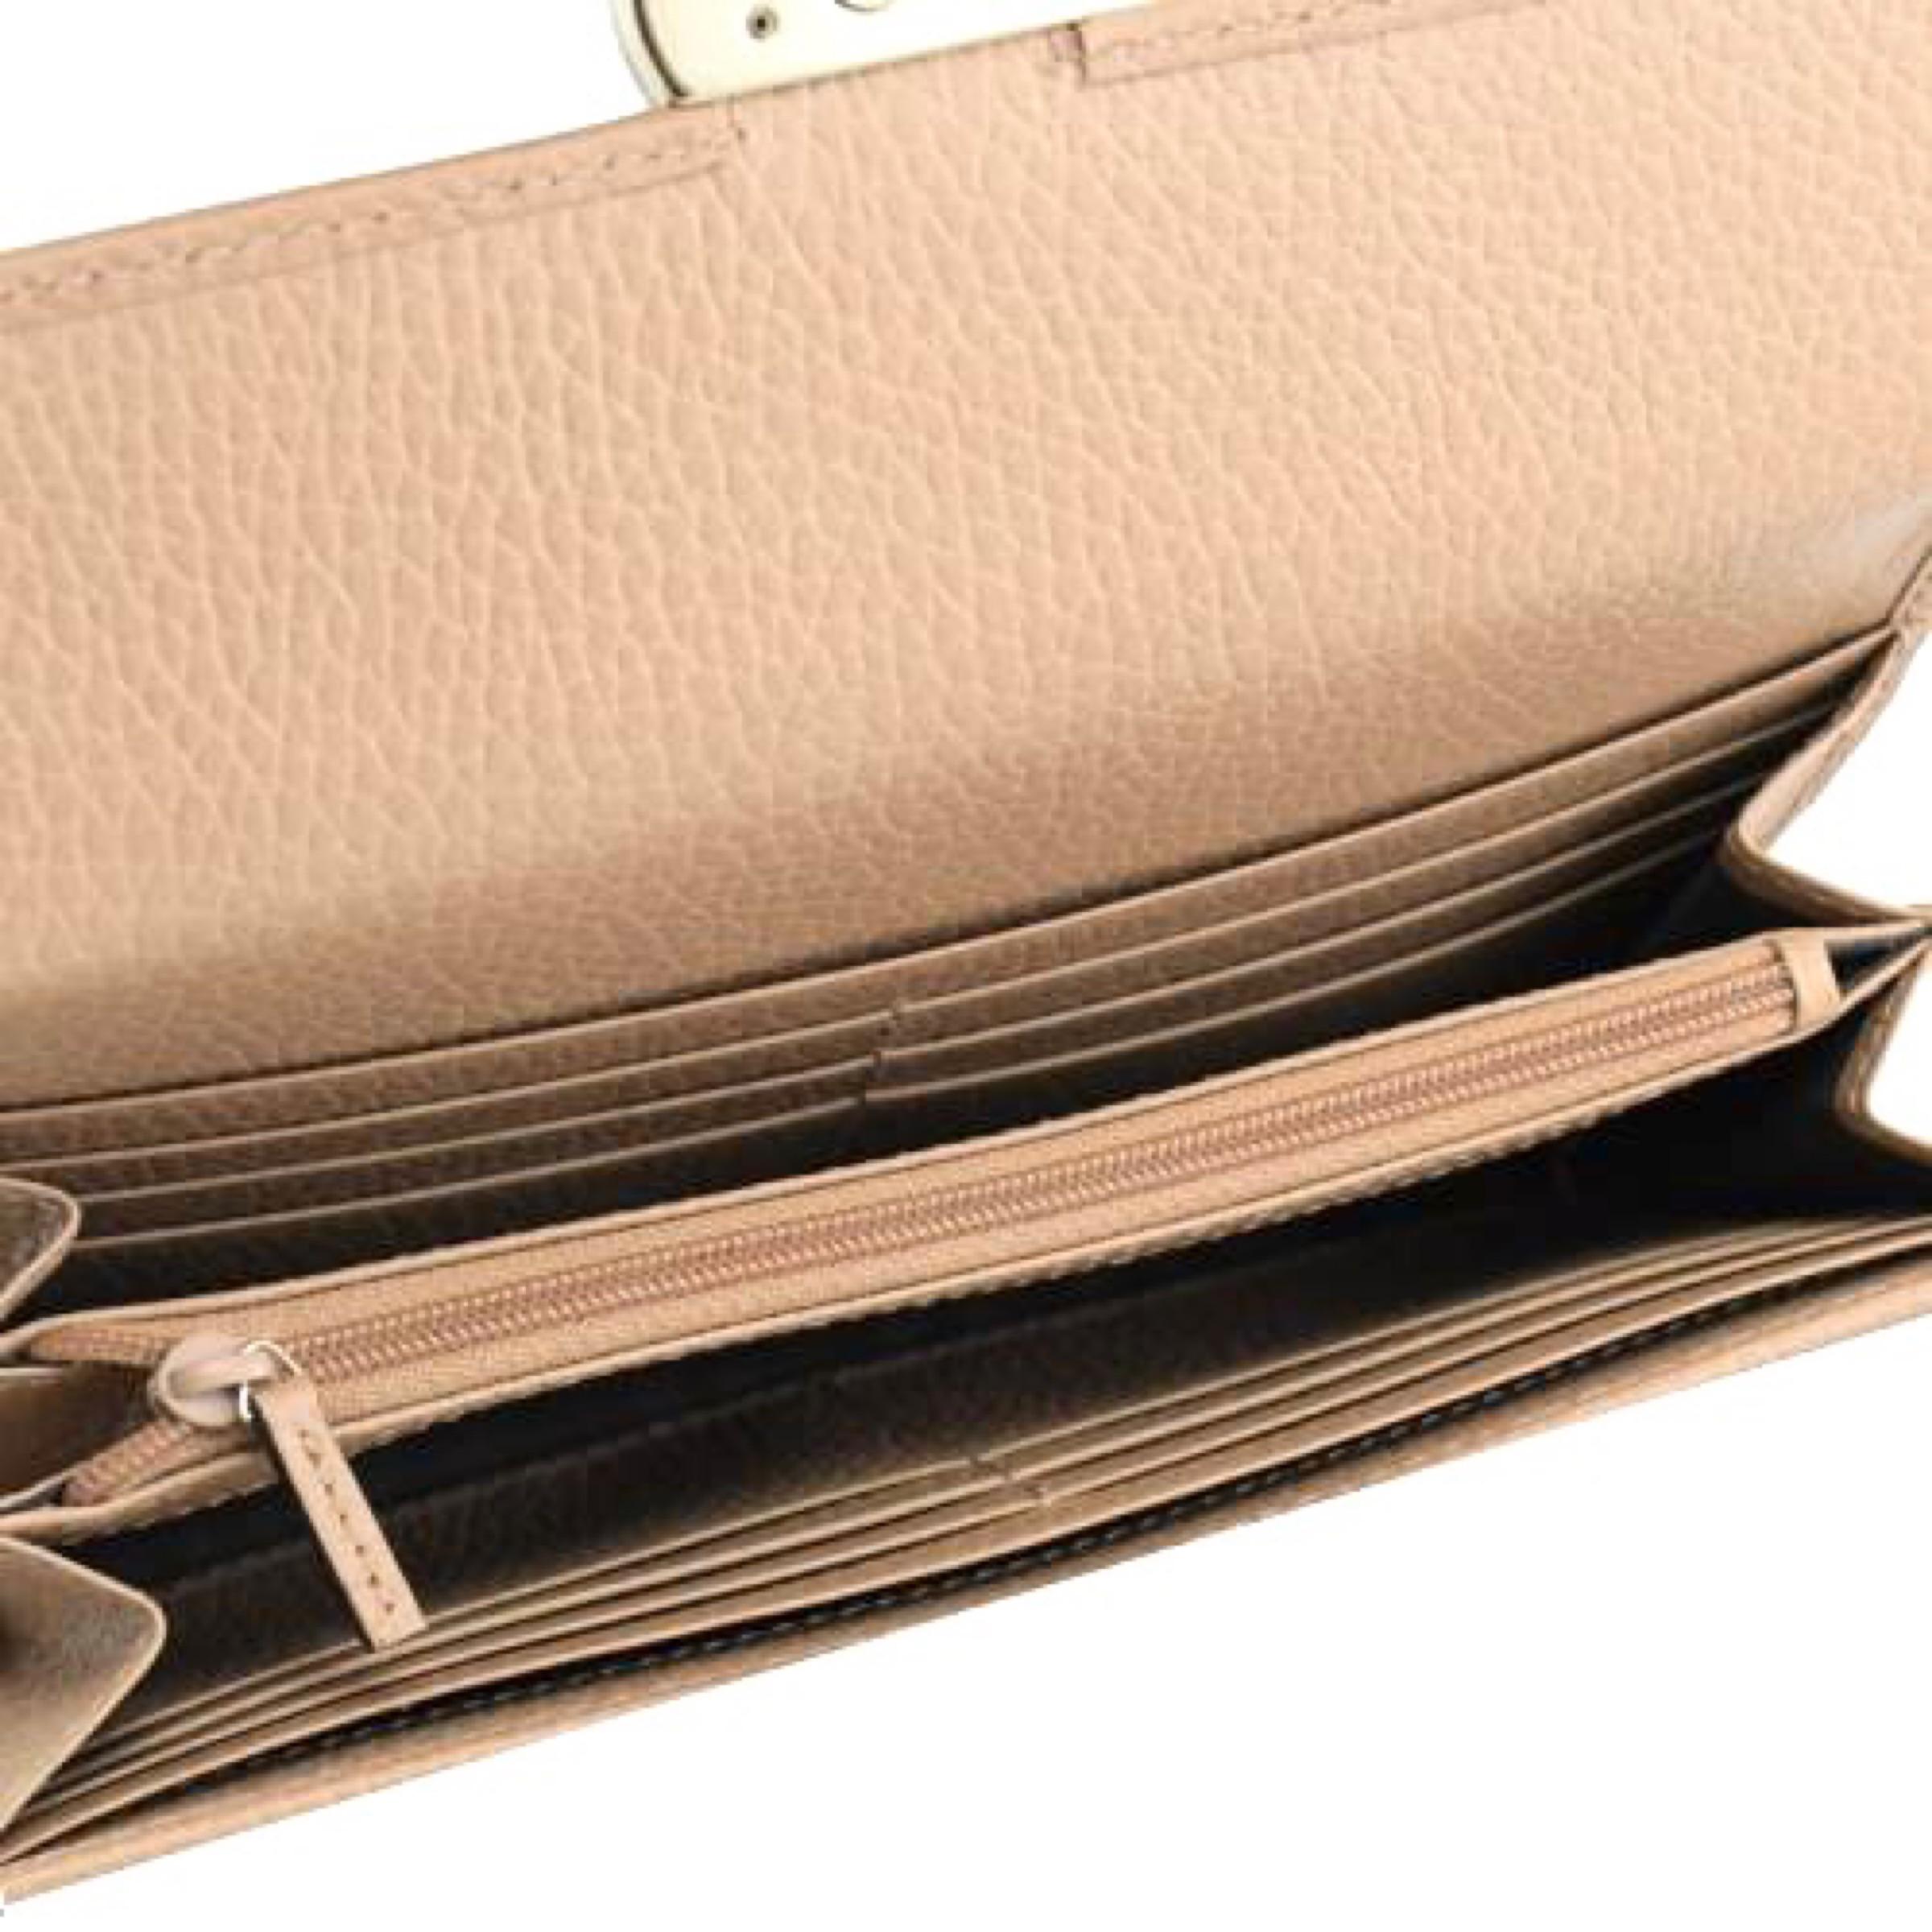 NEW Gucci Beige Interlocking G Leather Long Wallet Clutch Bag For Sale 4